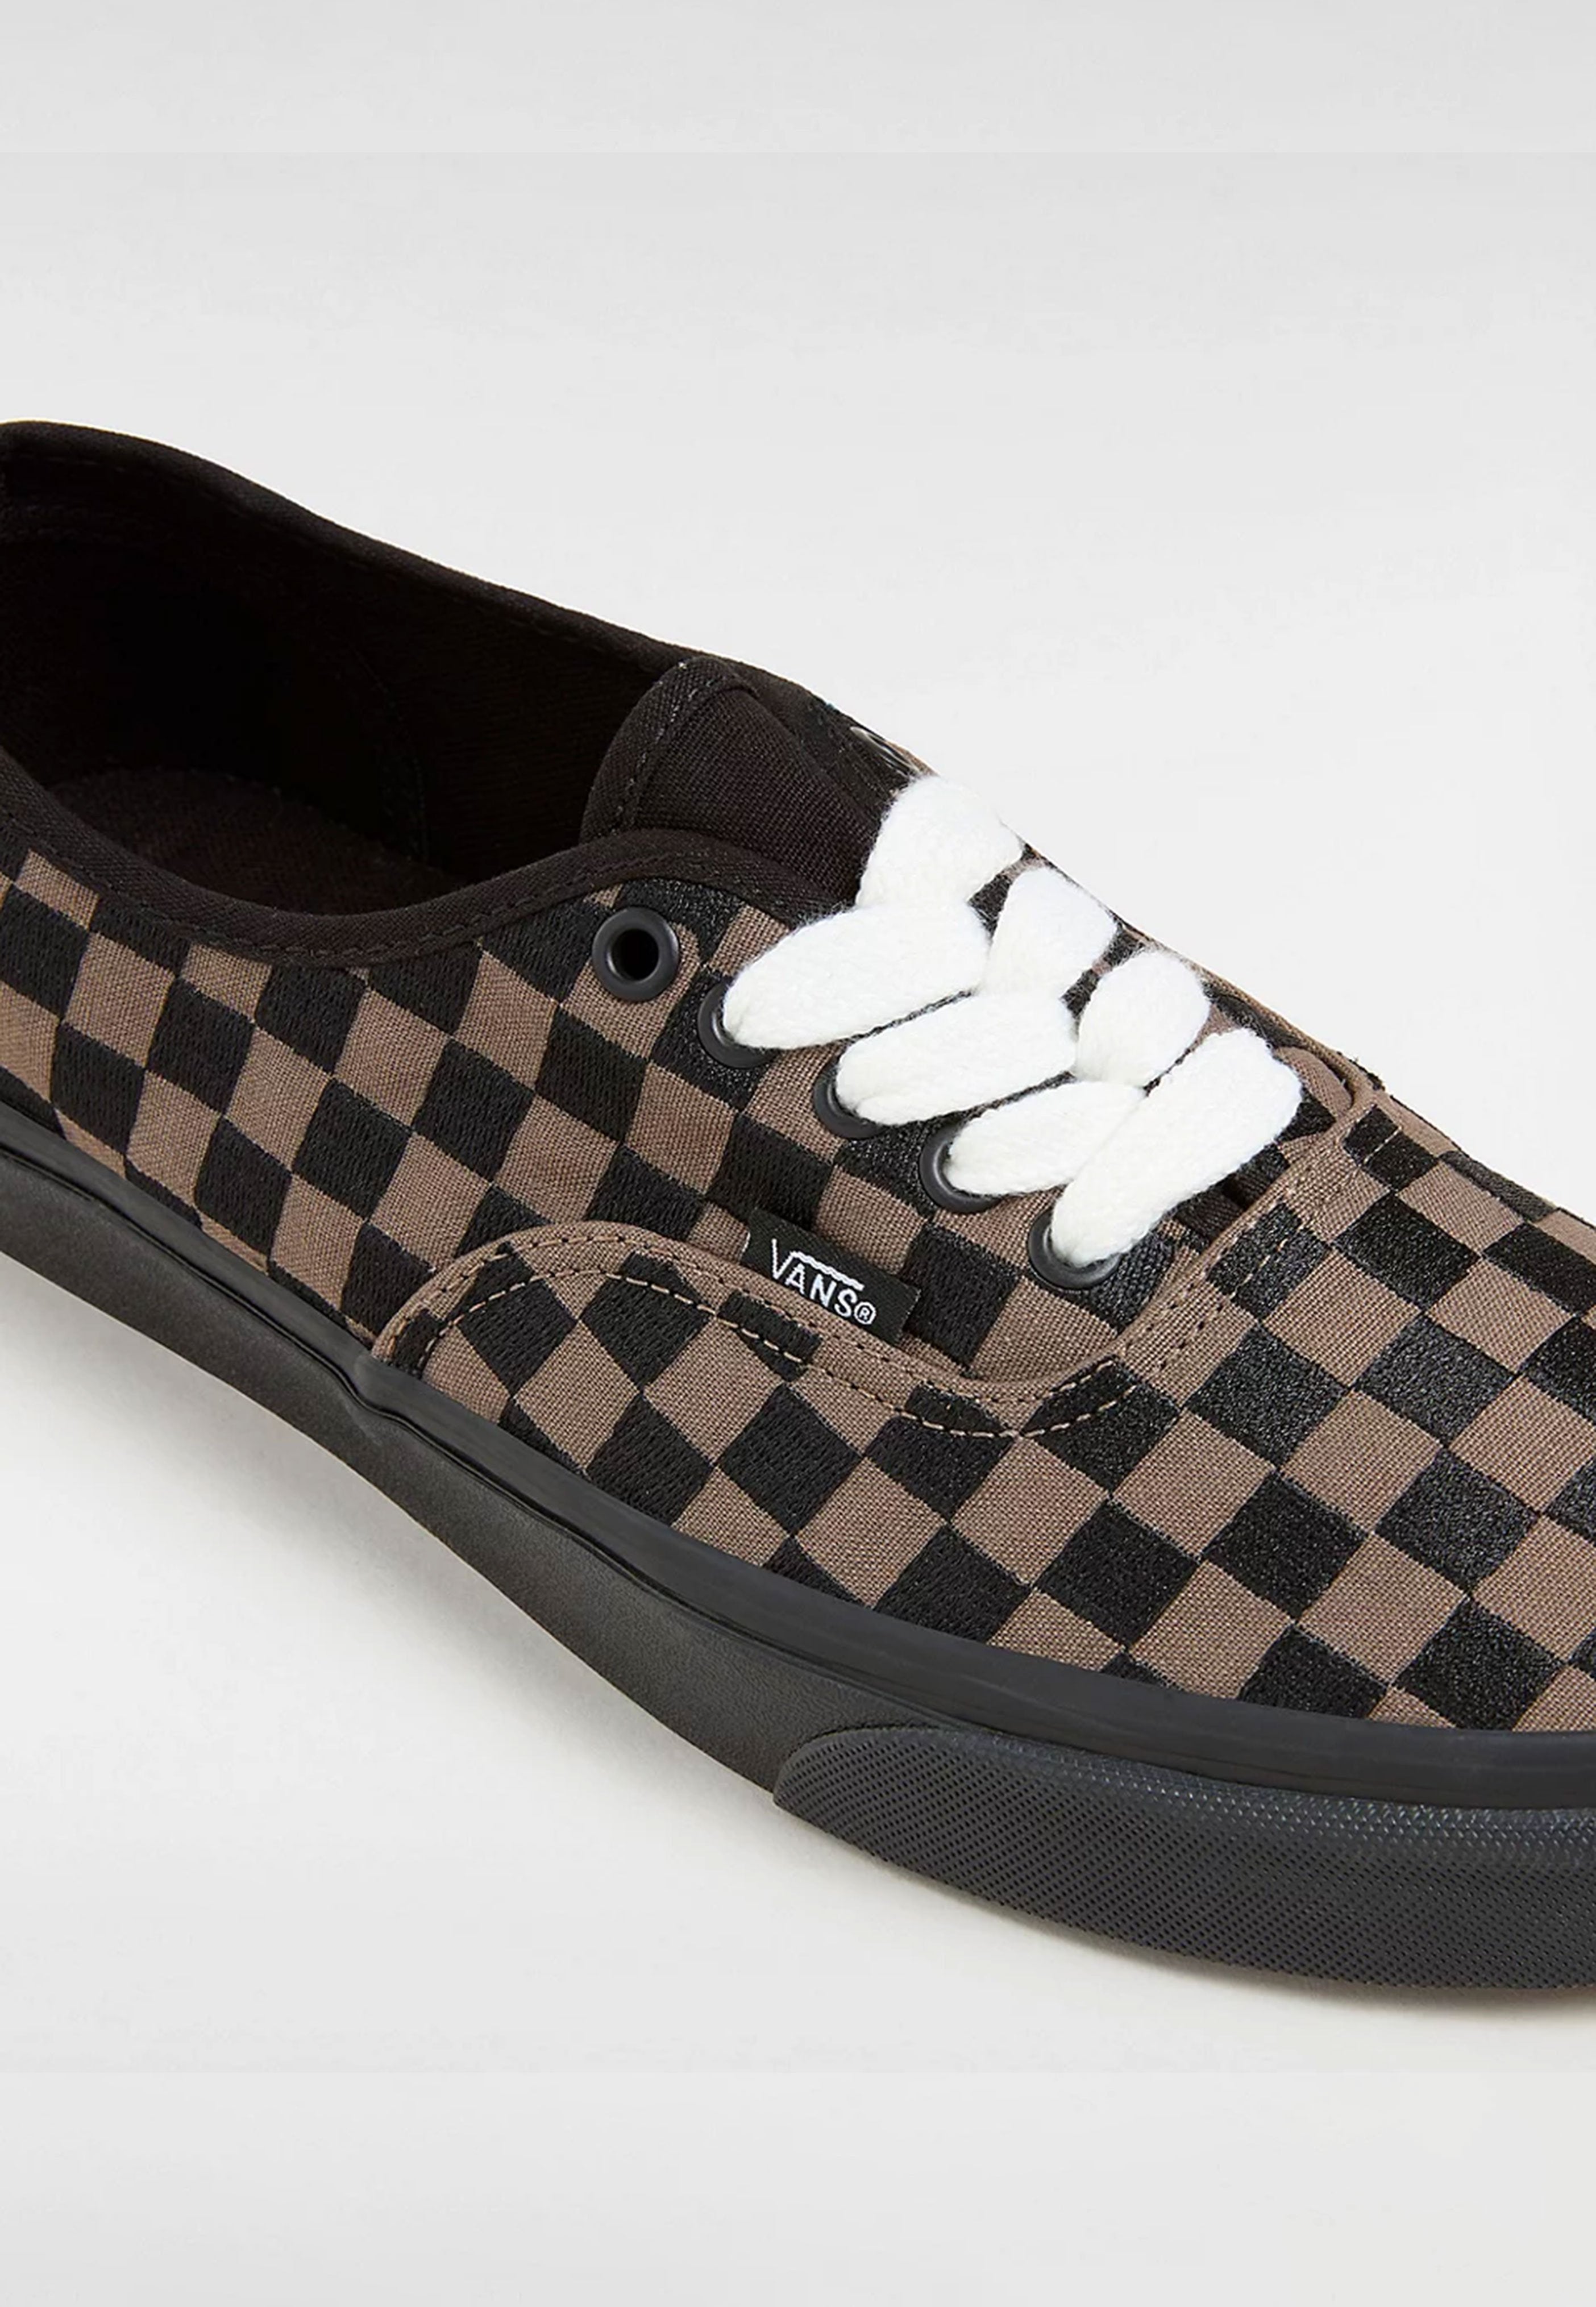 Vans - Authentic Embroidered Checker Black - Shoes